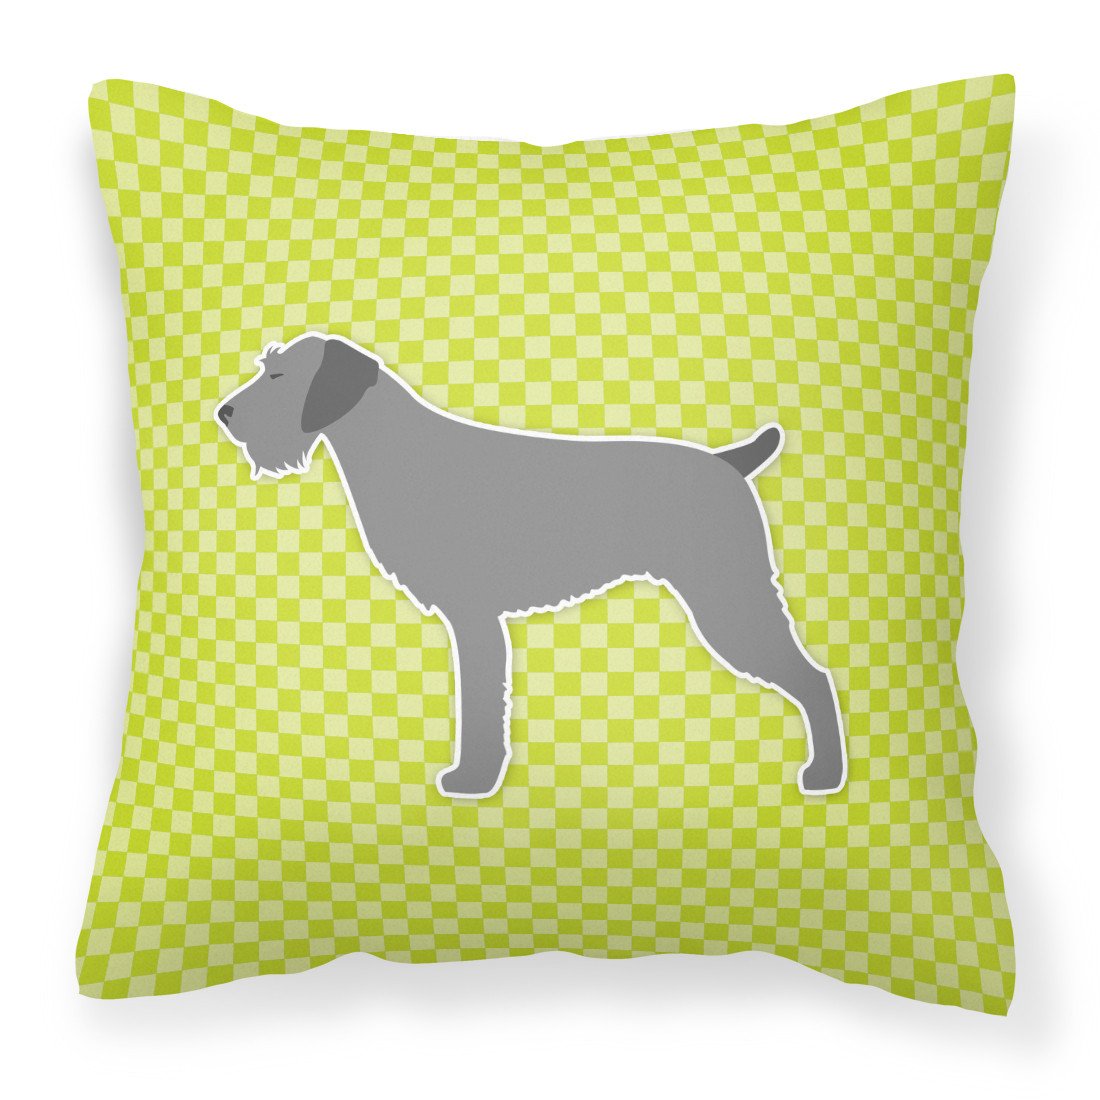 German Wirehaired Pointer Checkerboard Green Fabric Decorative Pillow BB3811PW1818 by Caroline's Treasures